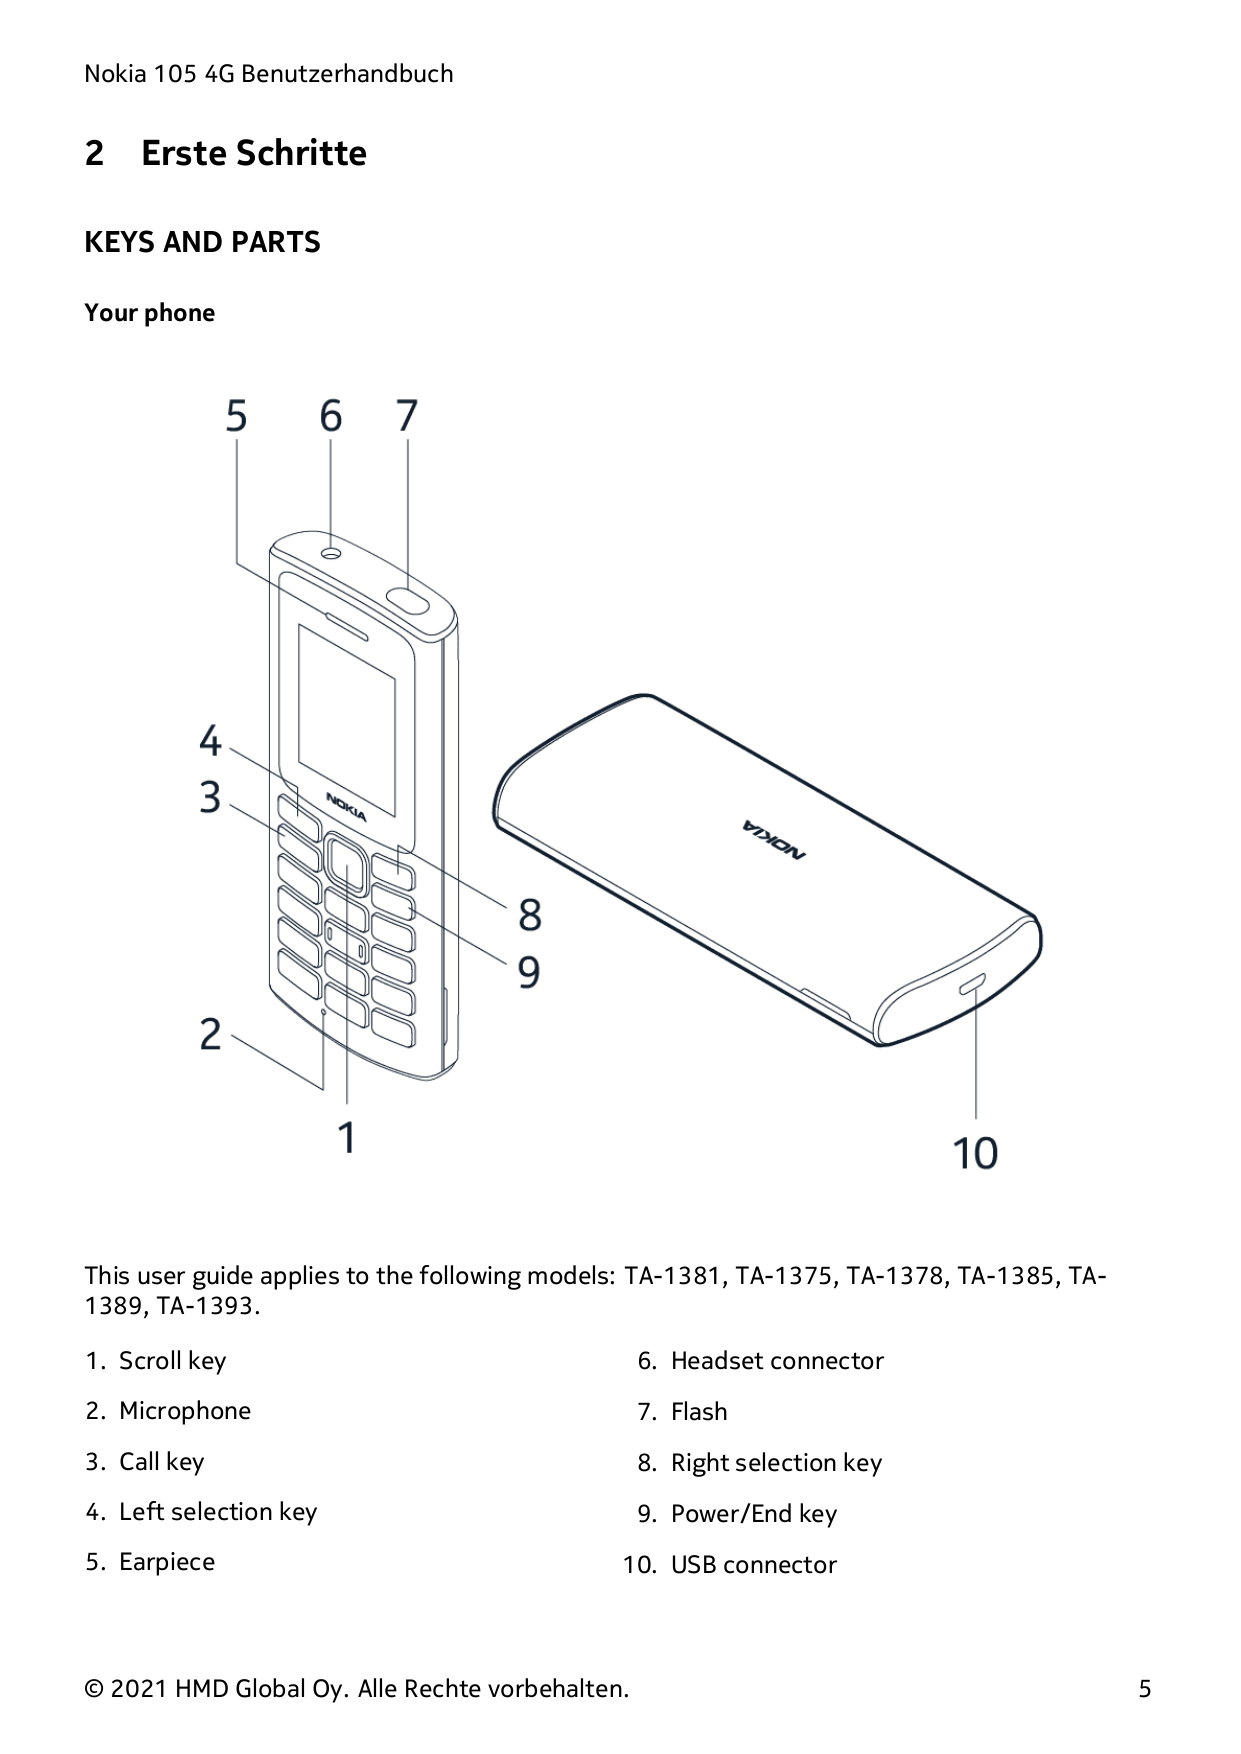 Nokia 105 4G Benutzerhandbuch2Erste SchritteKEYS AND PARTSYour phoneThis user guide applies to the following models: TA-1381, TA